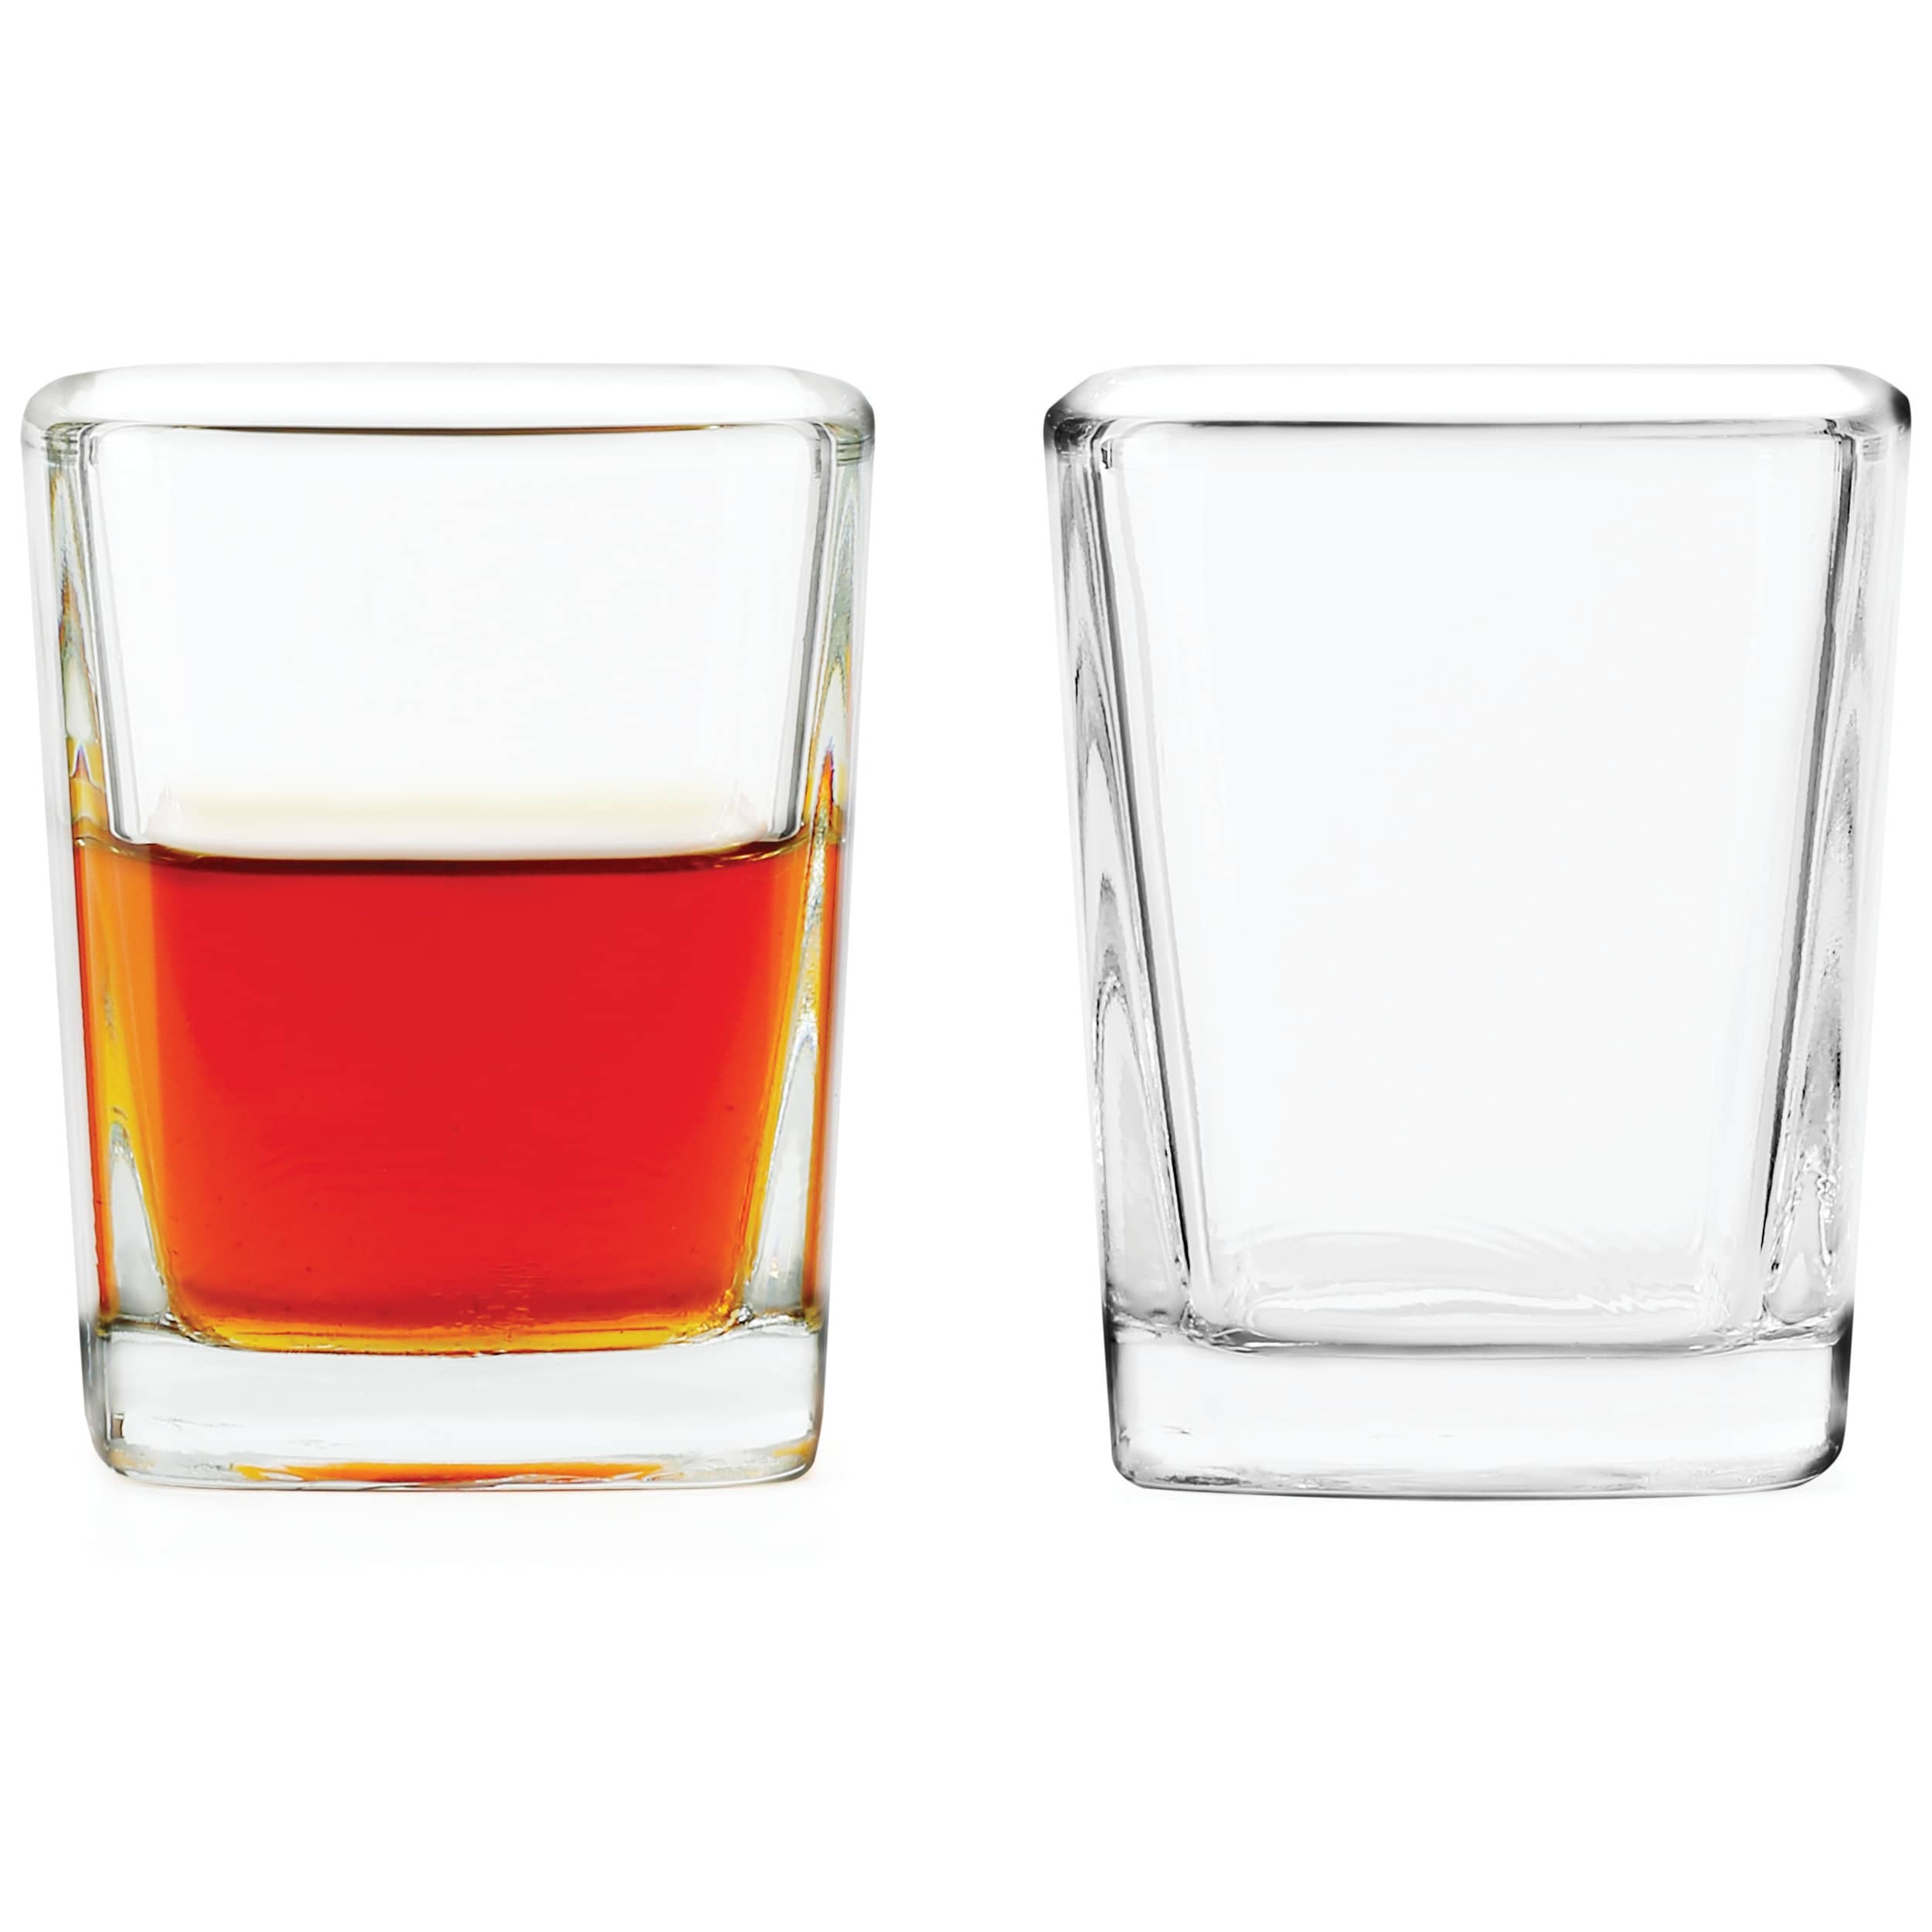 https://ak1.ostkcdn.com/images/products/is/images/direct/254f8f1ef252d3260b50bdd424ae4da4f0fa7630/Circleware-Simply-Everyday-Square-Shot-Glasses-Set-of-6-2.3oz.jpg